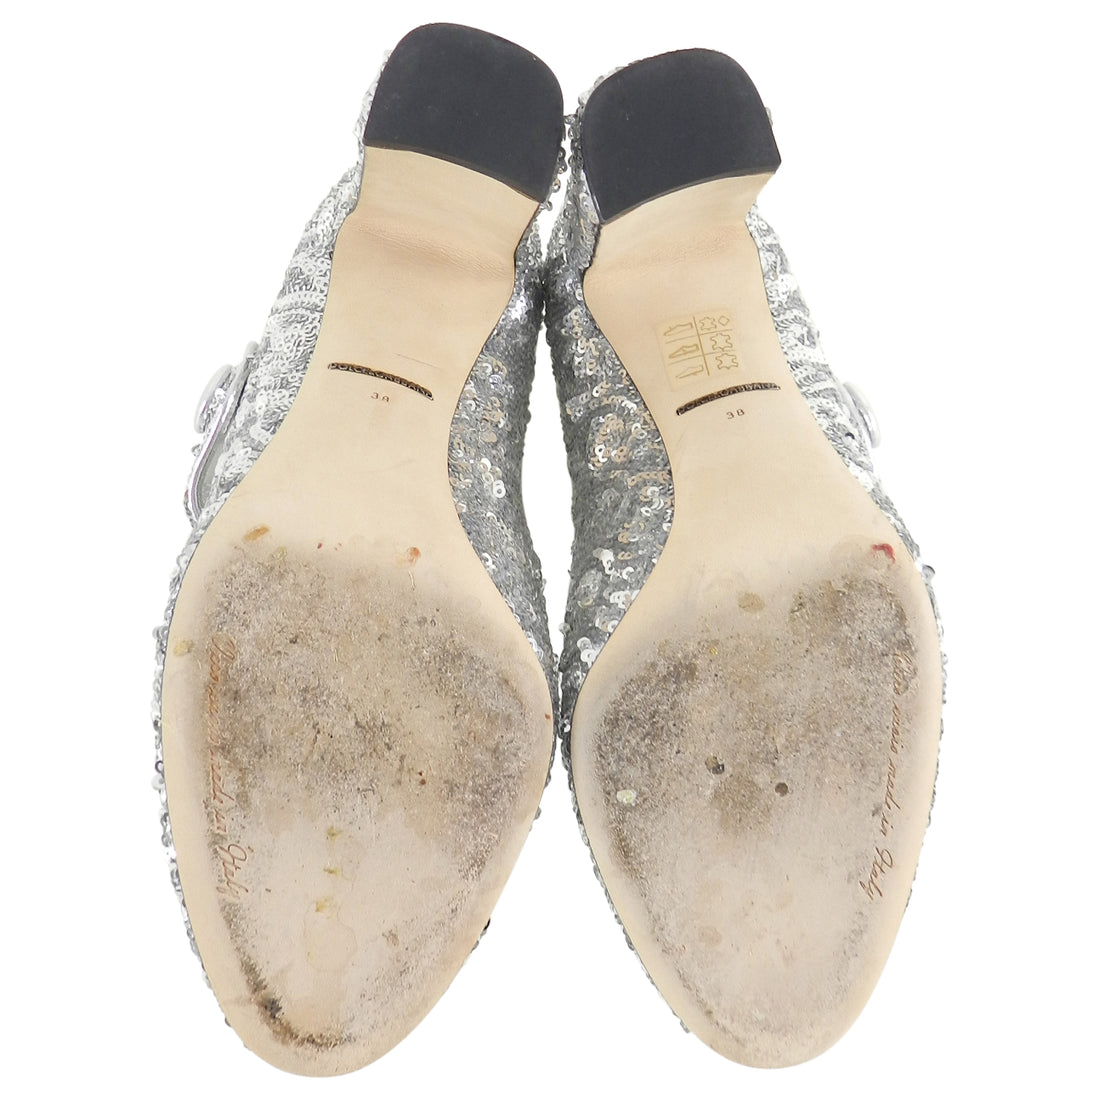 Dolce & Gabbana Vally Silver Sequin Mary Jane Shoes - 38